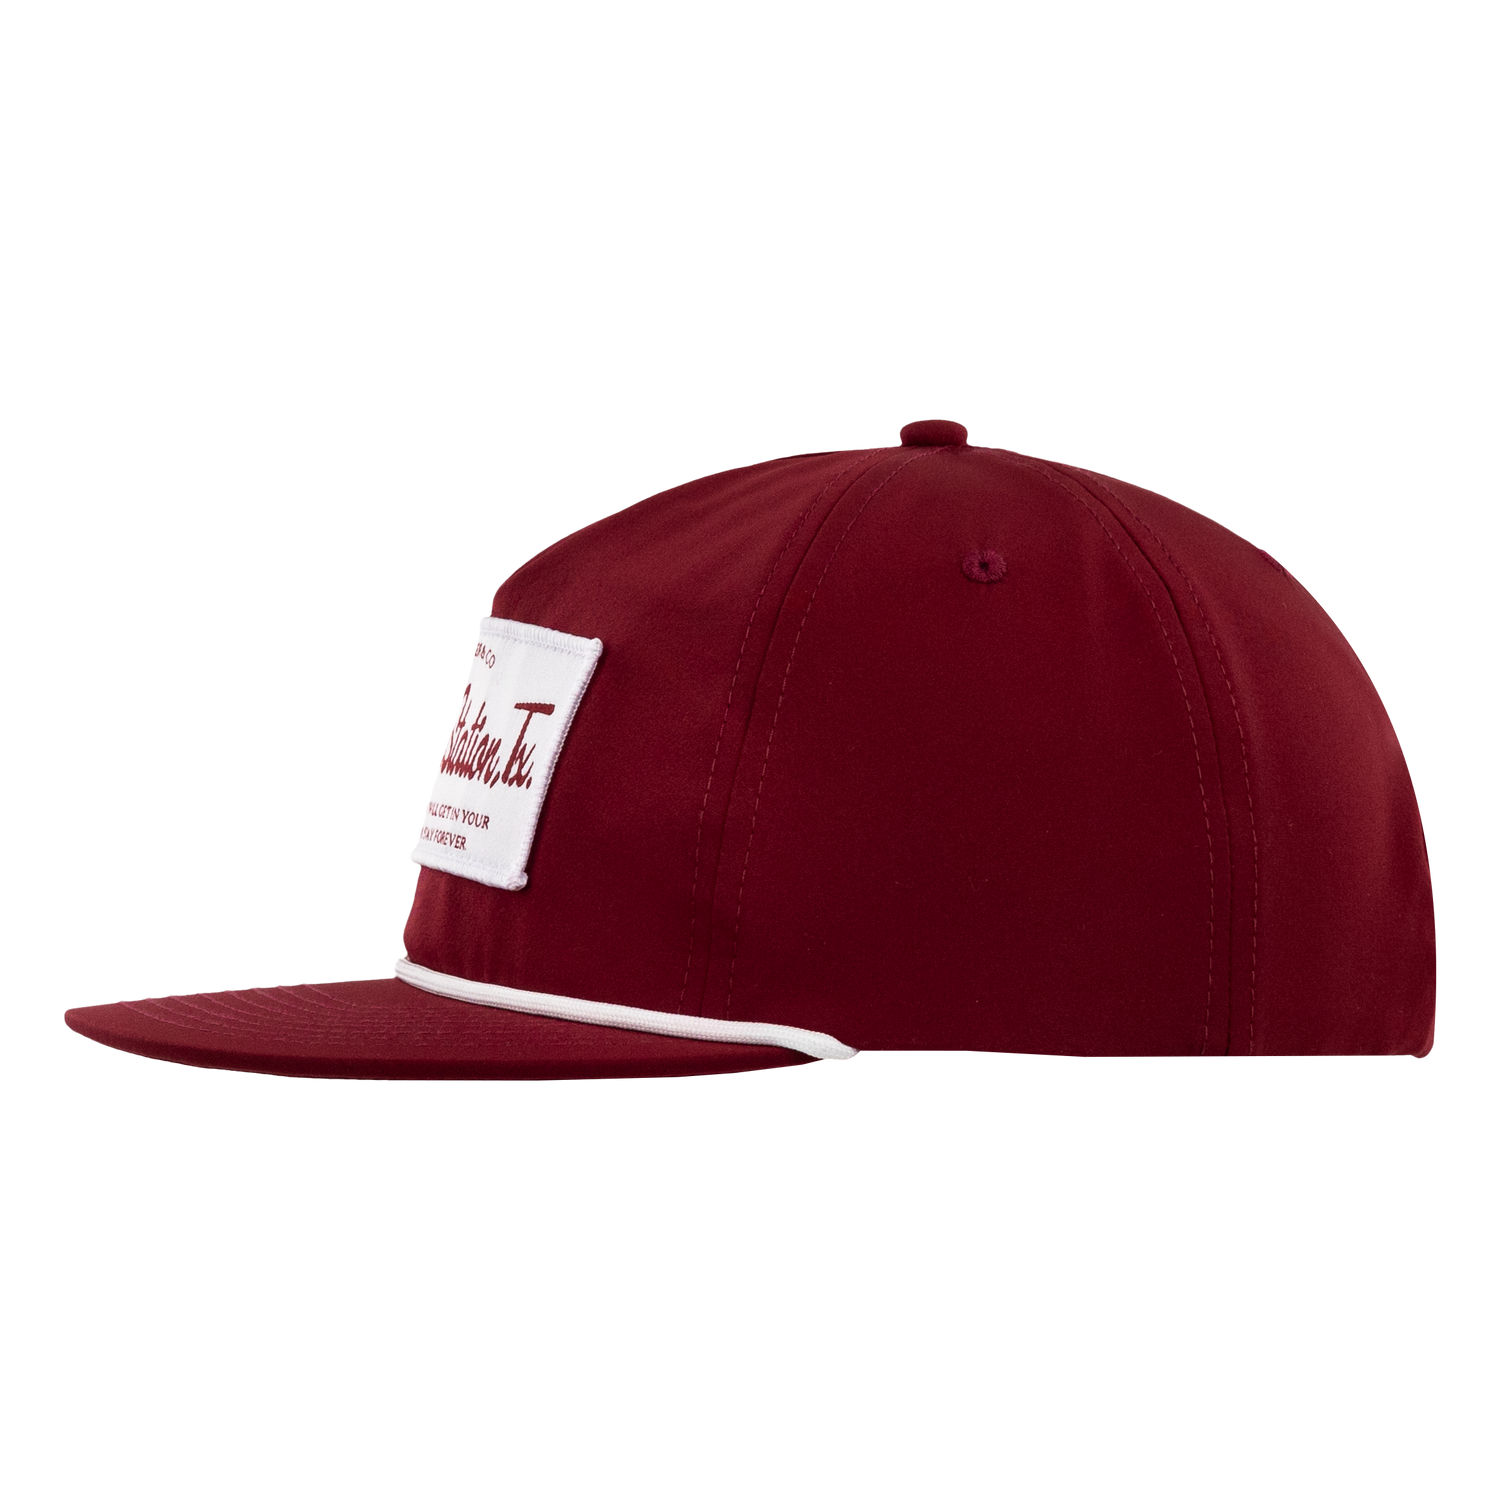 Texas A&M College Station Rope Hat